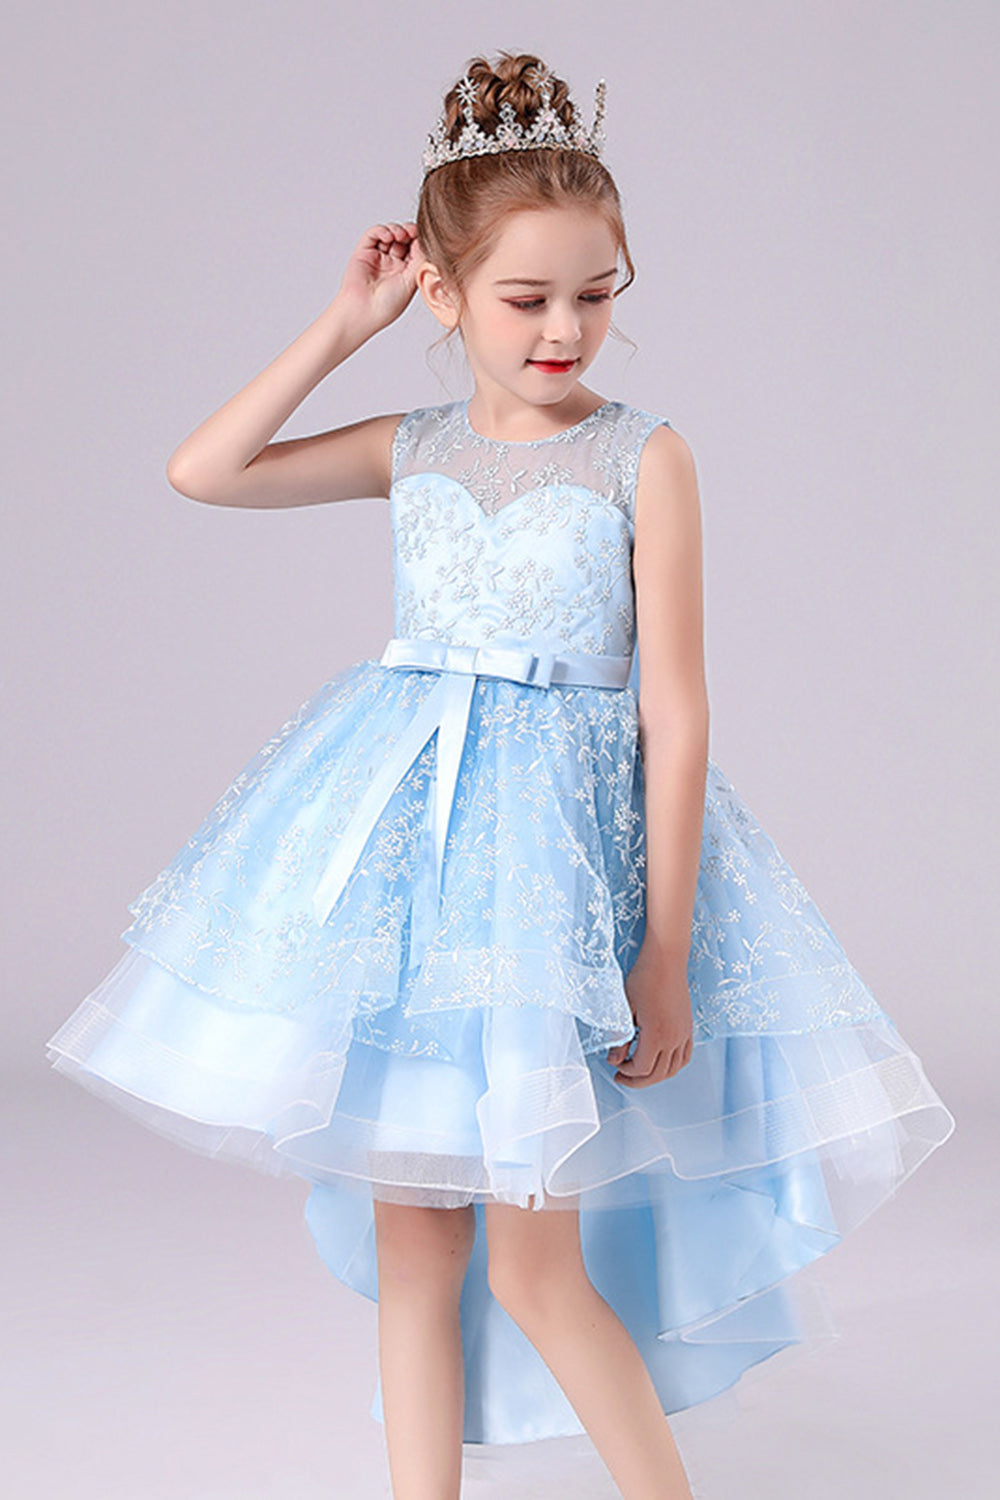 White High-low Flower Girl Dress with Bow